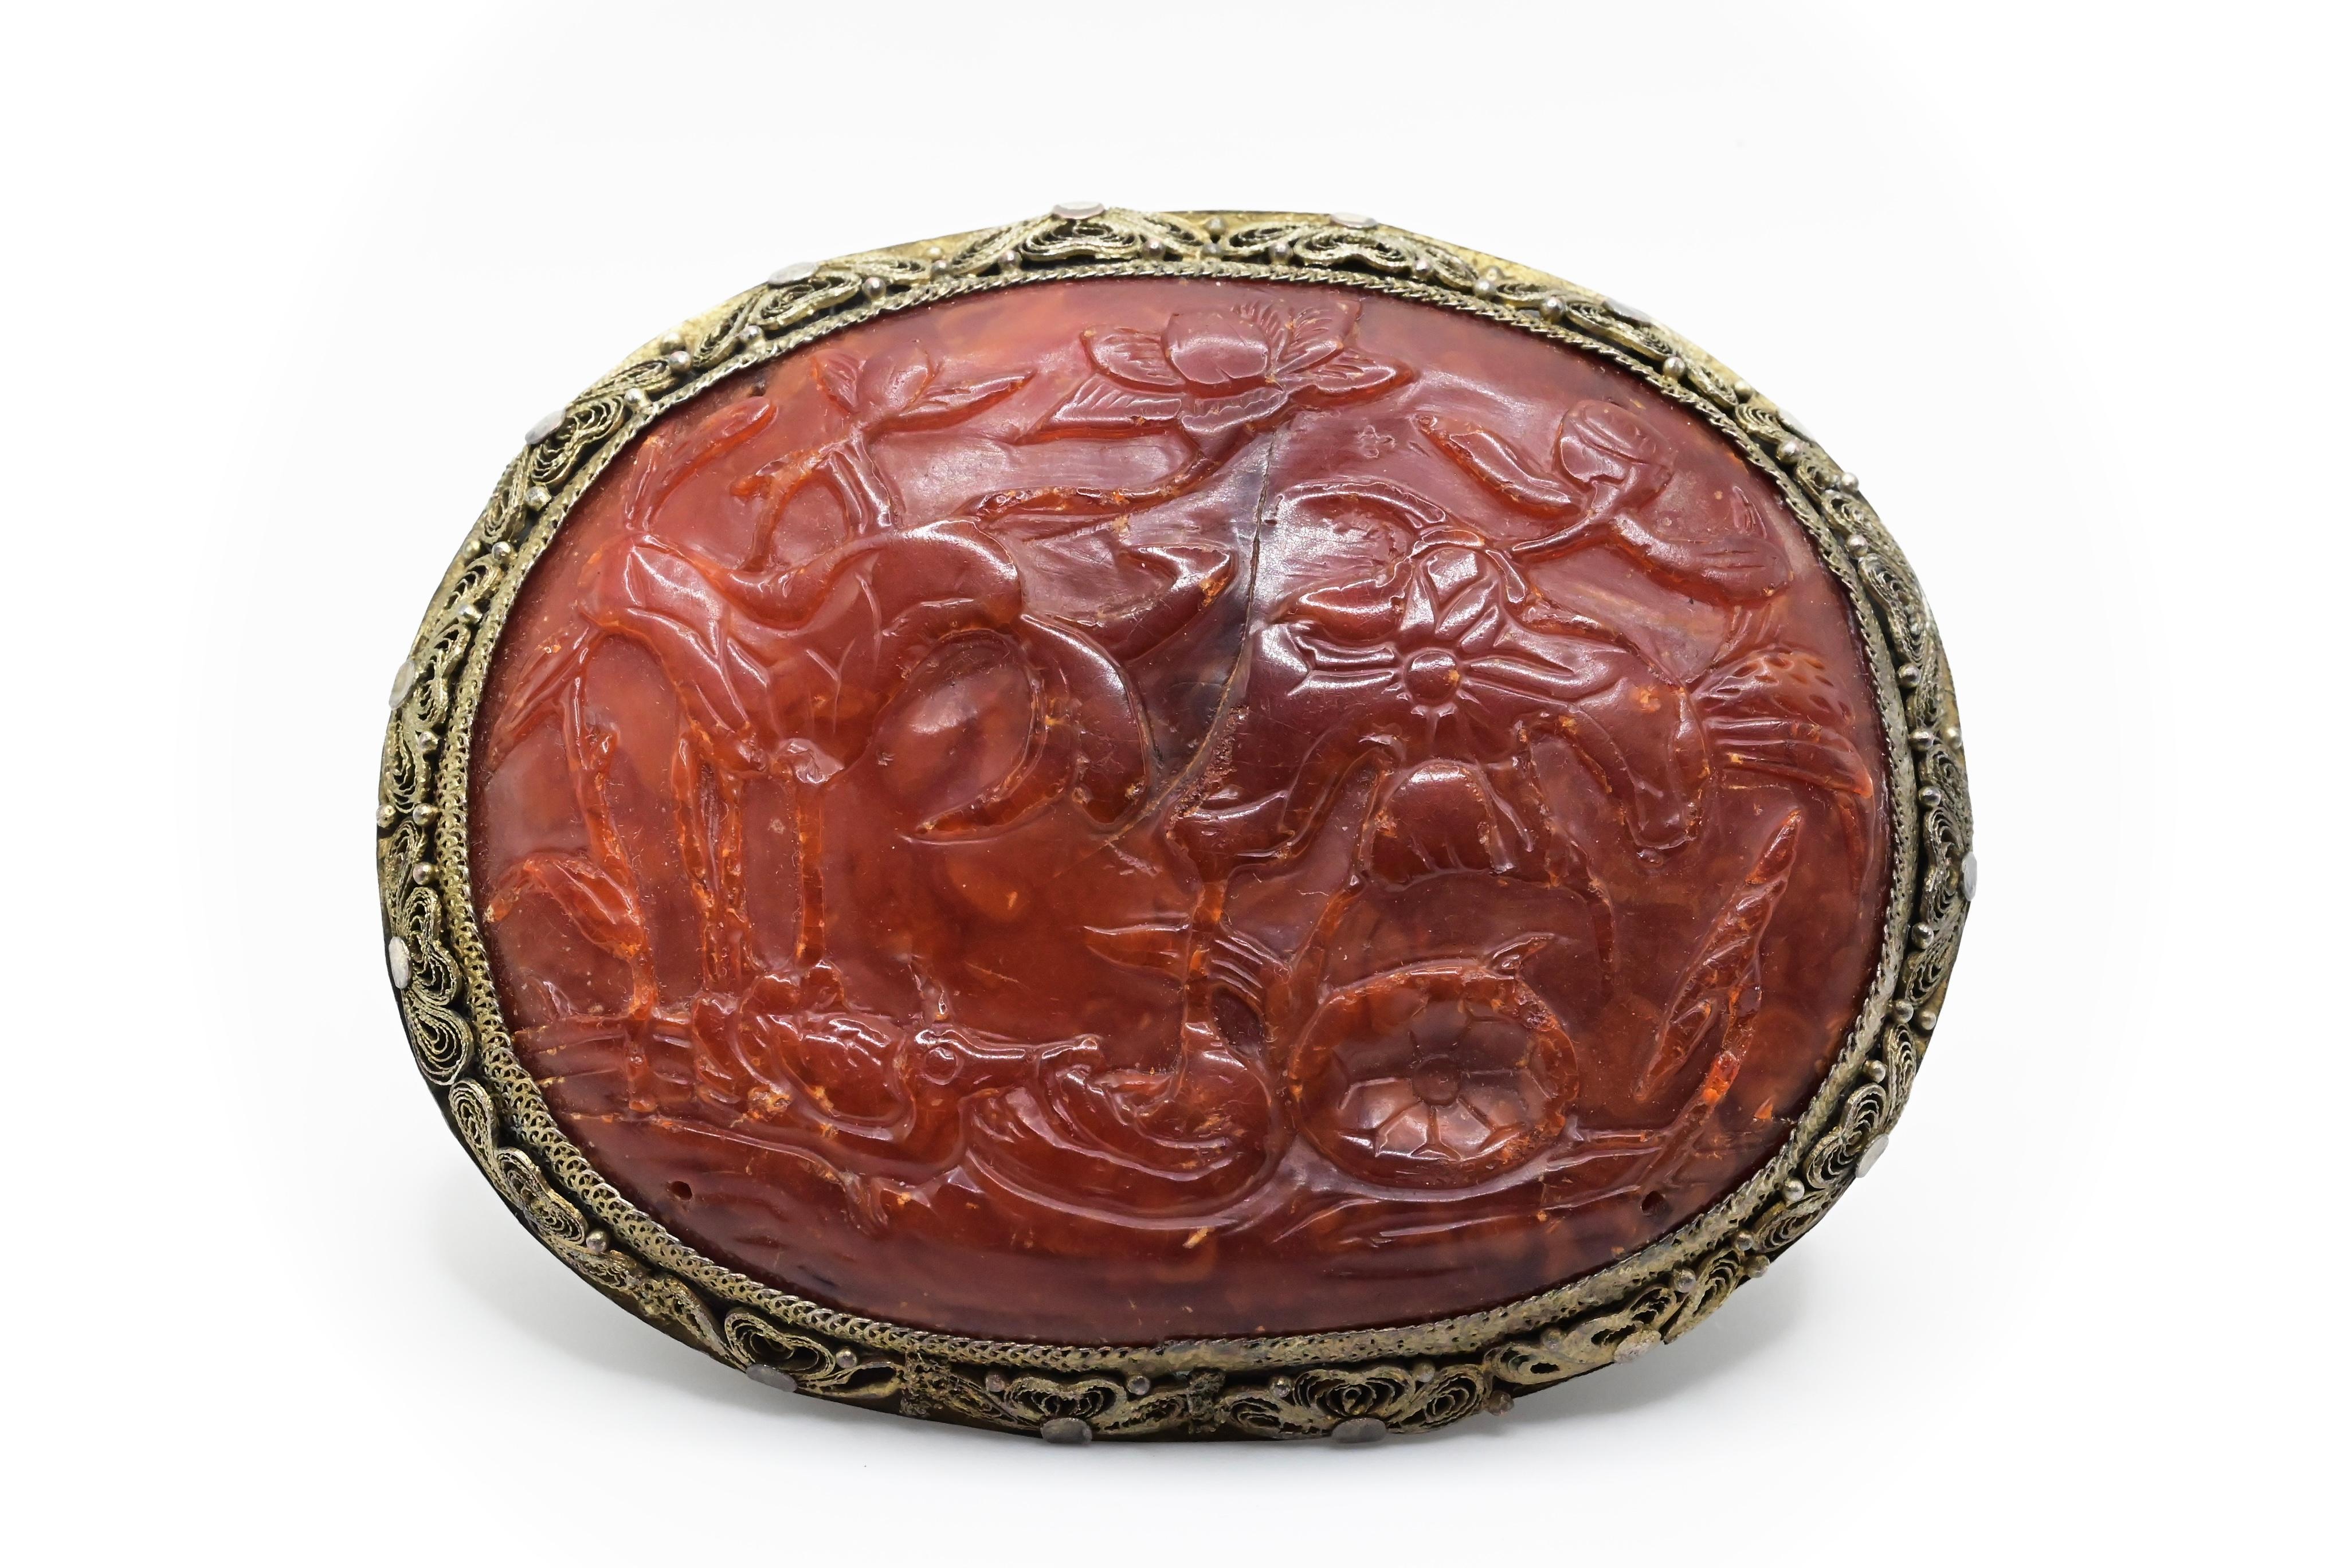 This is a stunning antique Chinese carved amber brooch. The age of the amber is approximately 150-200 years old. Amber of this quality and dark hue tends to be around of that age. Amber slowly adapts from bright yellow to dark red and purple as it